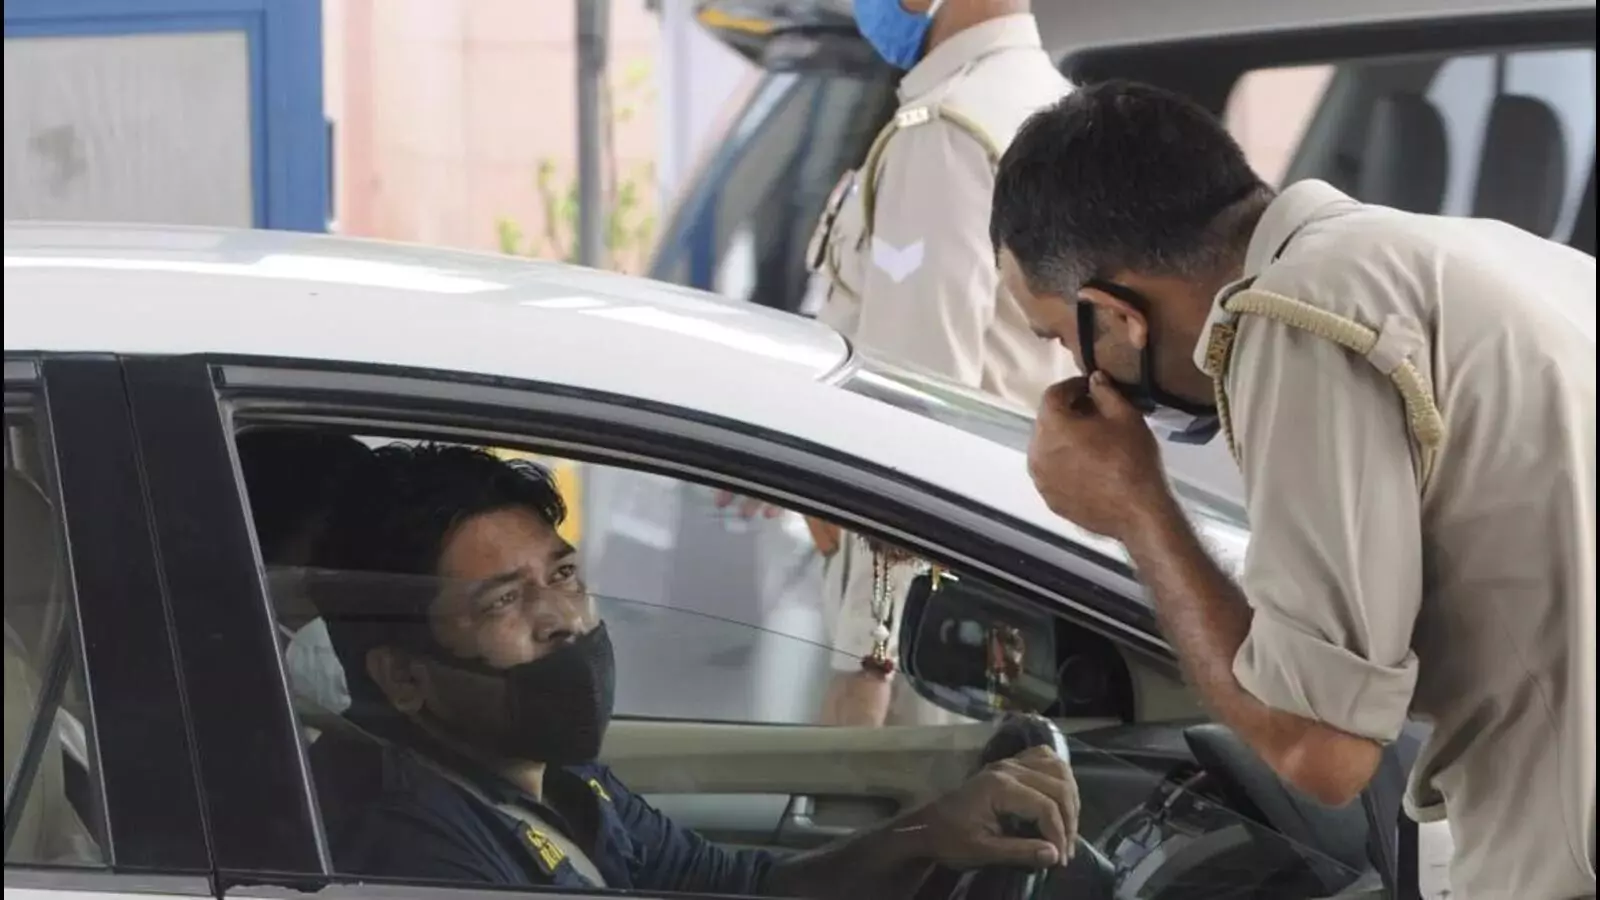 Report: Masks not compulsory in Delhi for those driving alone in cars